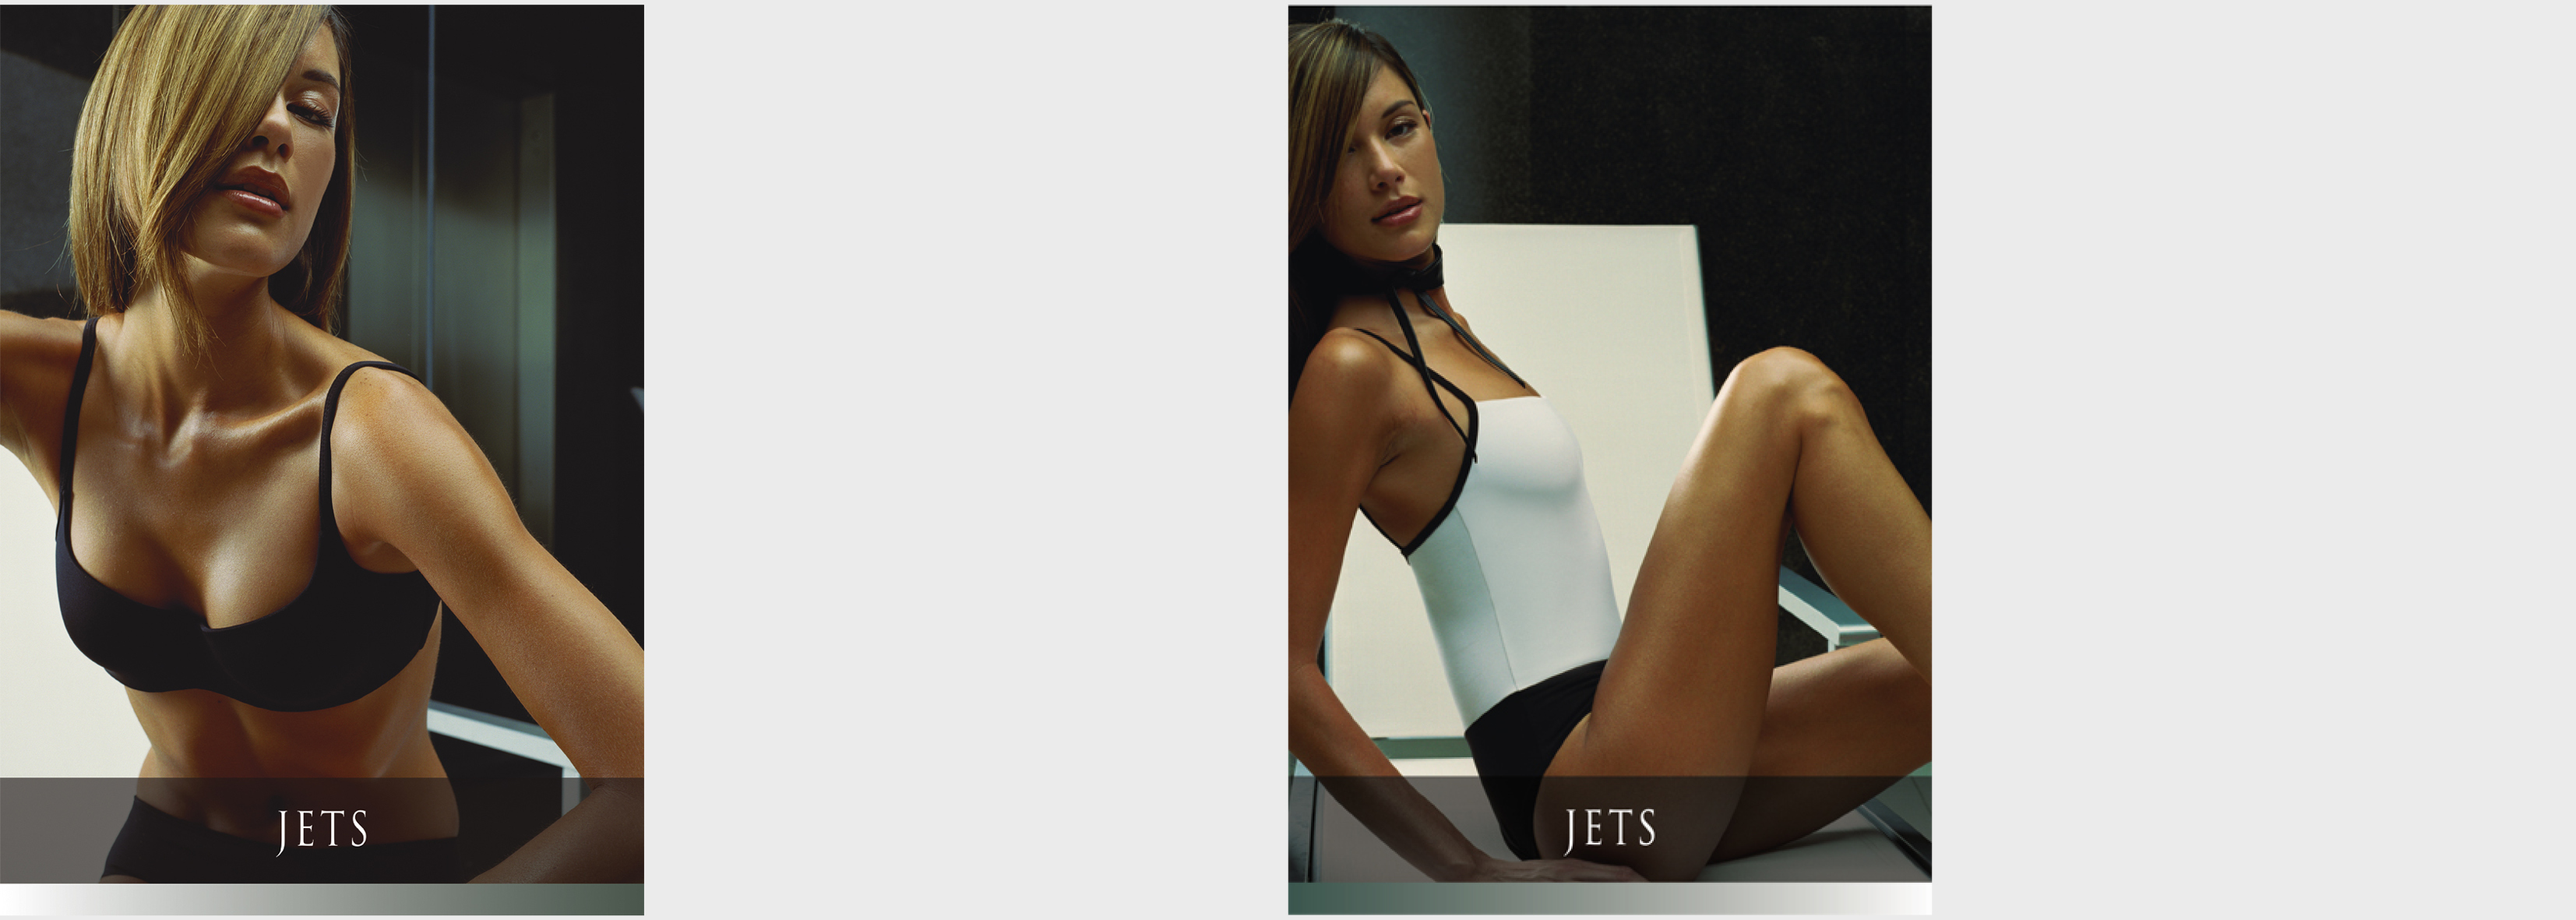 Jets Swimwear Global Campaign Posters